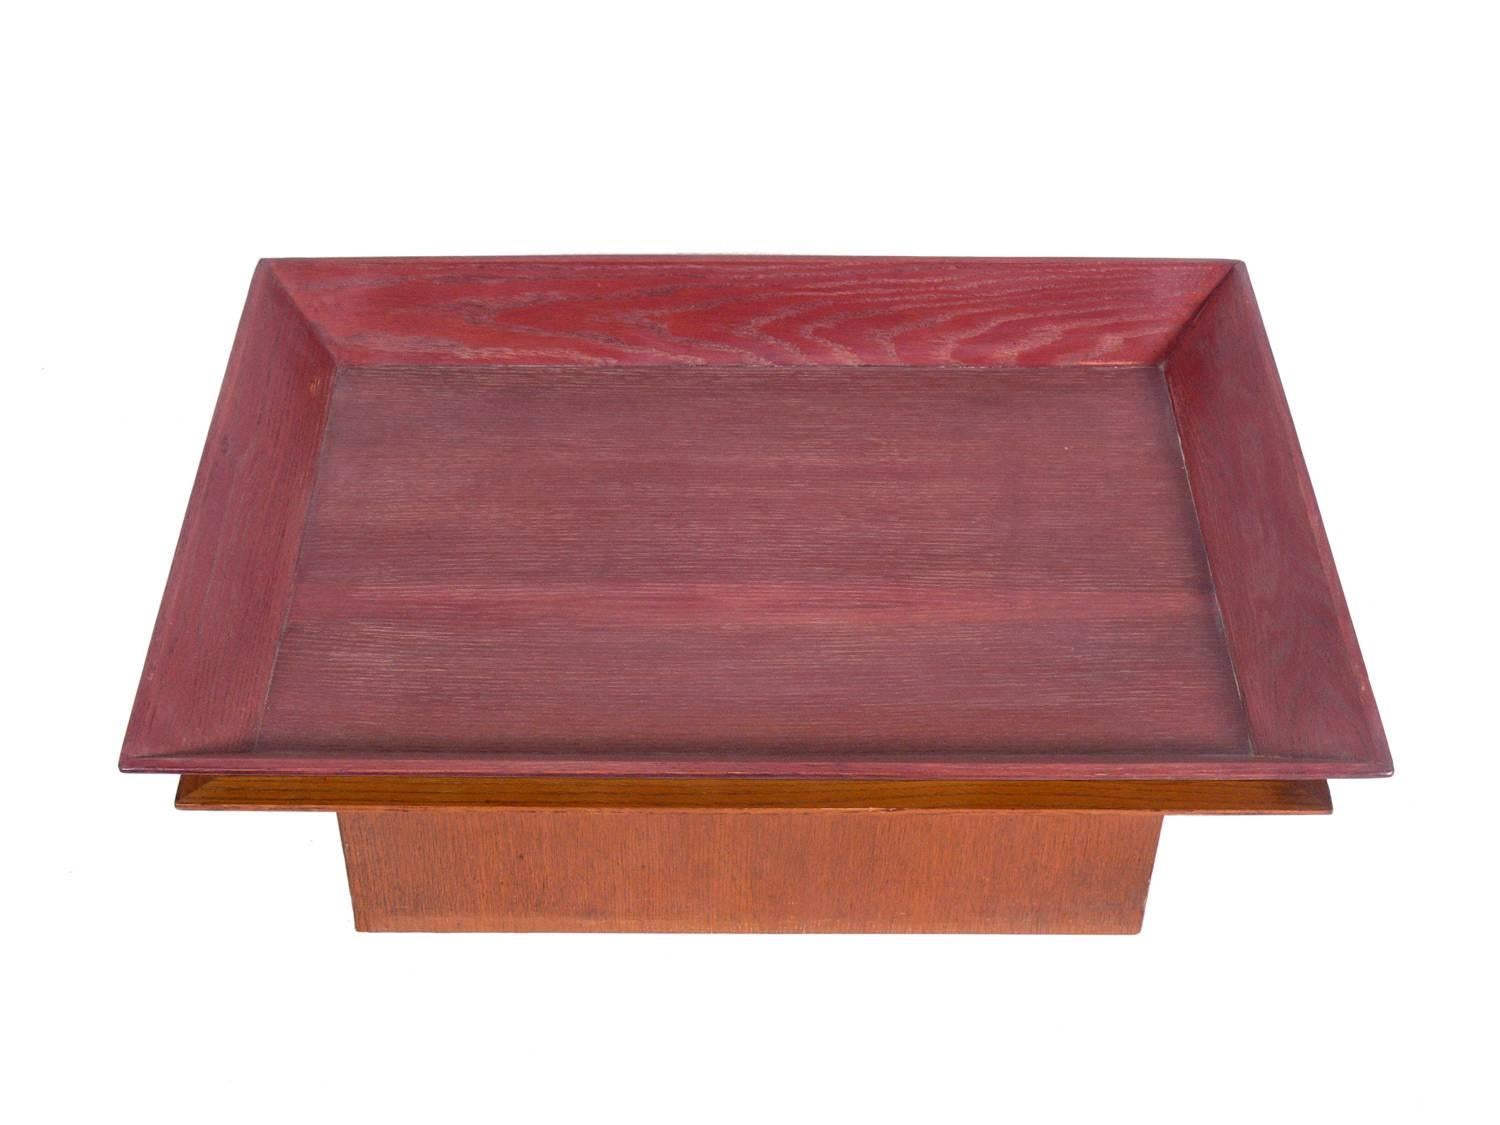 Skyscraper form coffee table with removable tray, in the manner of Paul Frankl, American, circa 1930s. It is executed in oak with the bottom portion finished in a natural color and the tray top executed in an Asian red color.